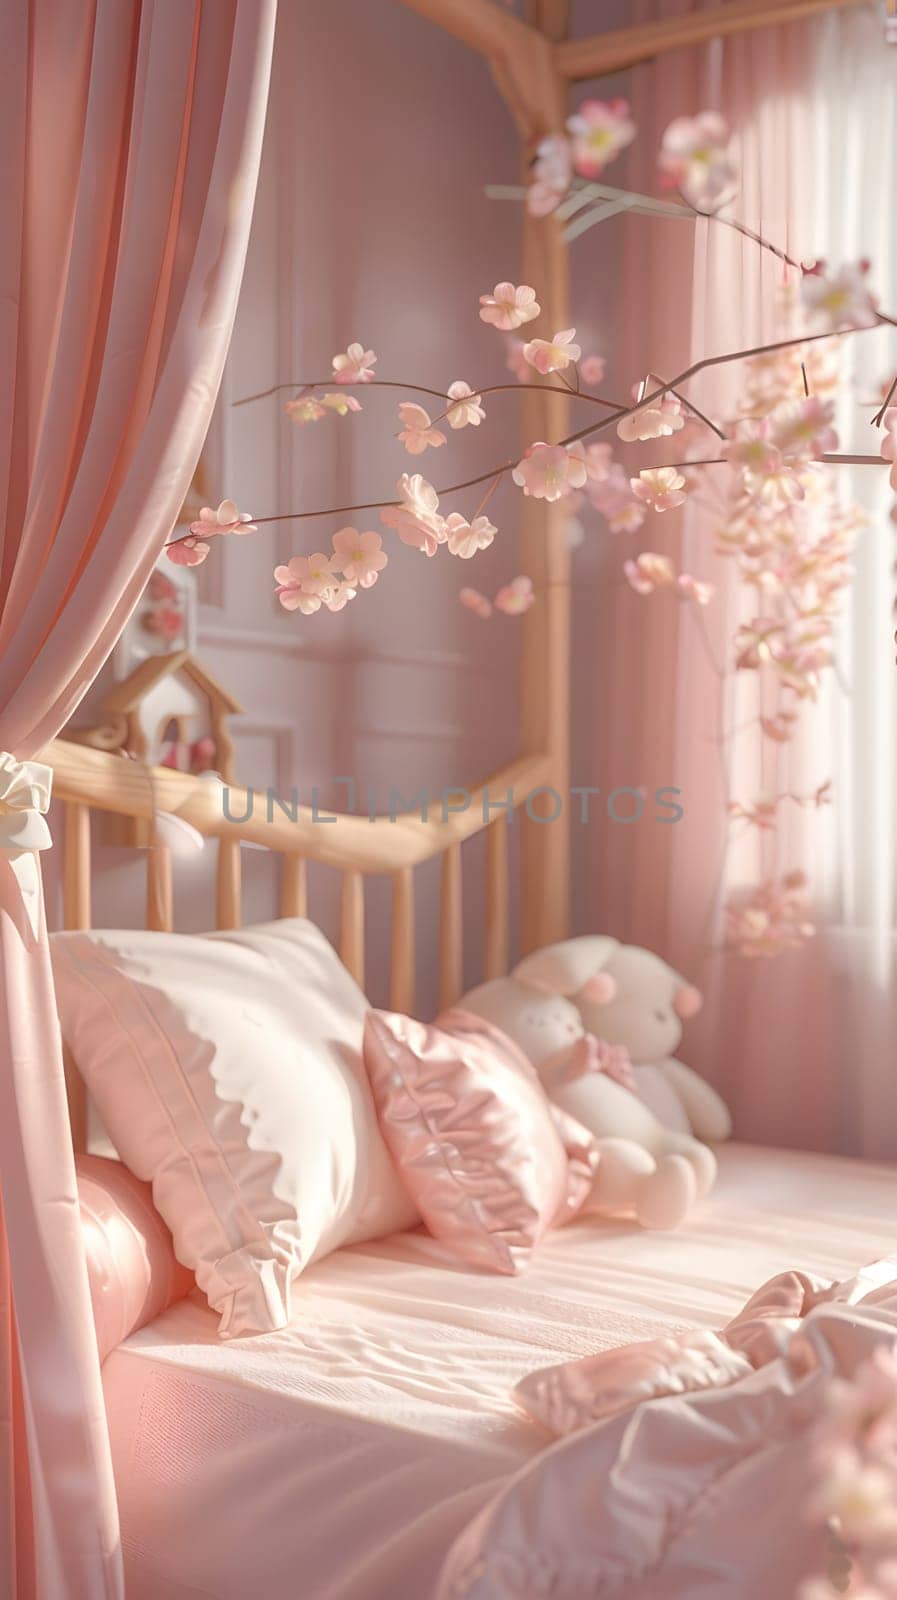 a pink bedroom with a canopy bed and flowers hanging from the ceiling by Nadtochiy